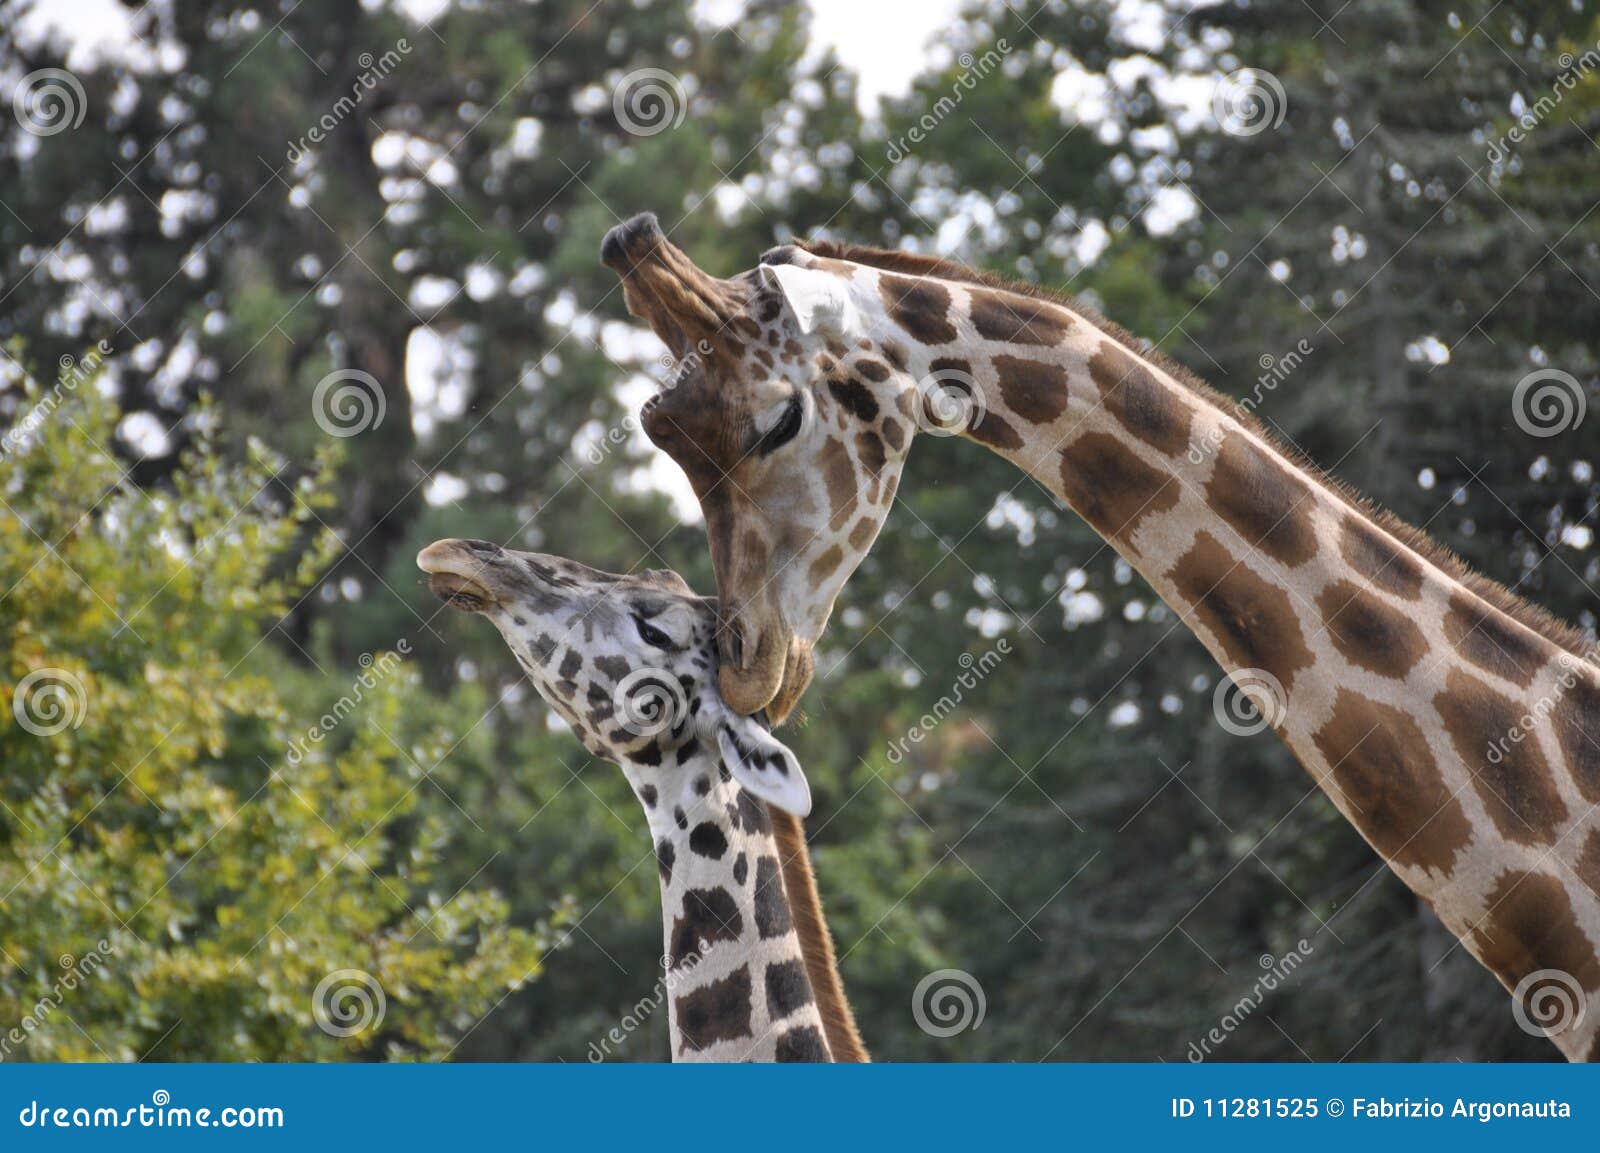 female giraffe with young